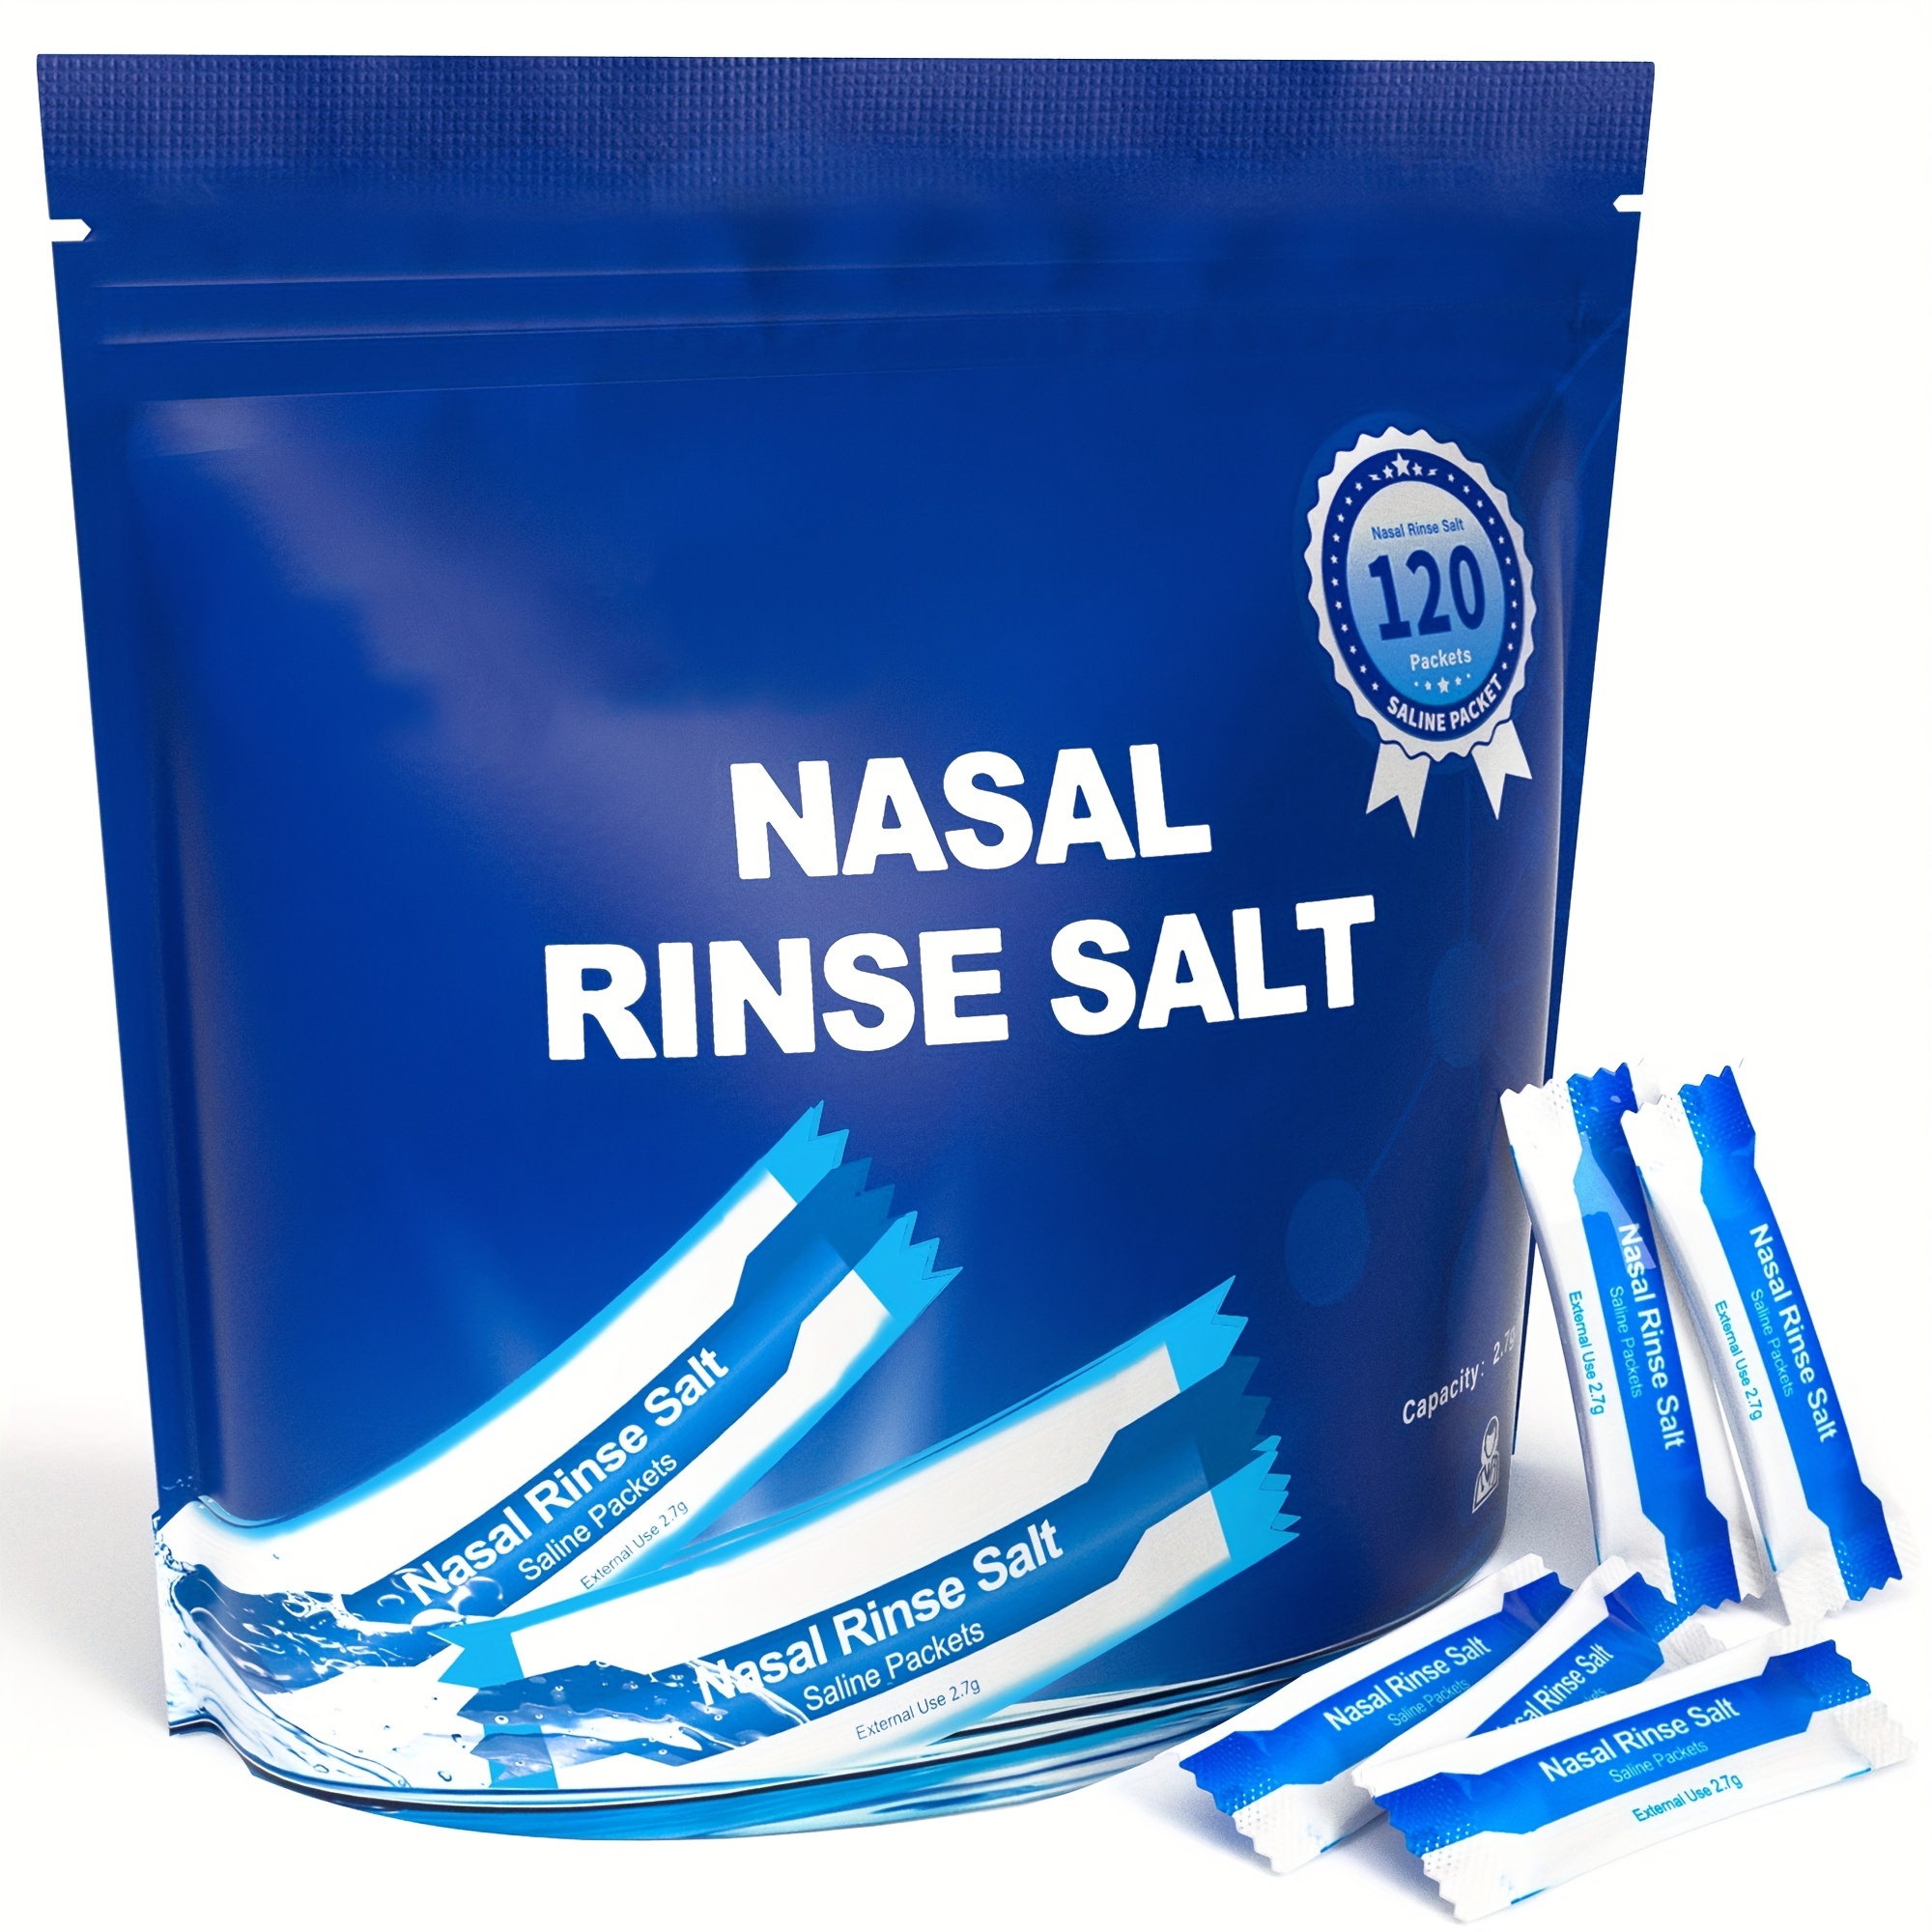 Lurrose 40 Packs Packets Nasal Wash Nose Cleansing Salt Nasal Cleaning Salt  Nasal Rinse Mix Pack Instant X40 Blue Sodium Chloride Auxiliary Supplies  Rinse Mix for Nose Saline Packs